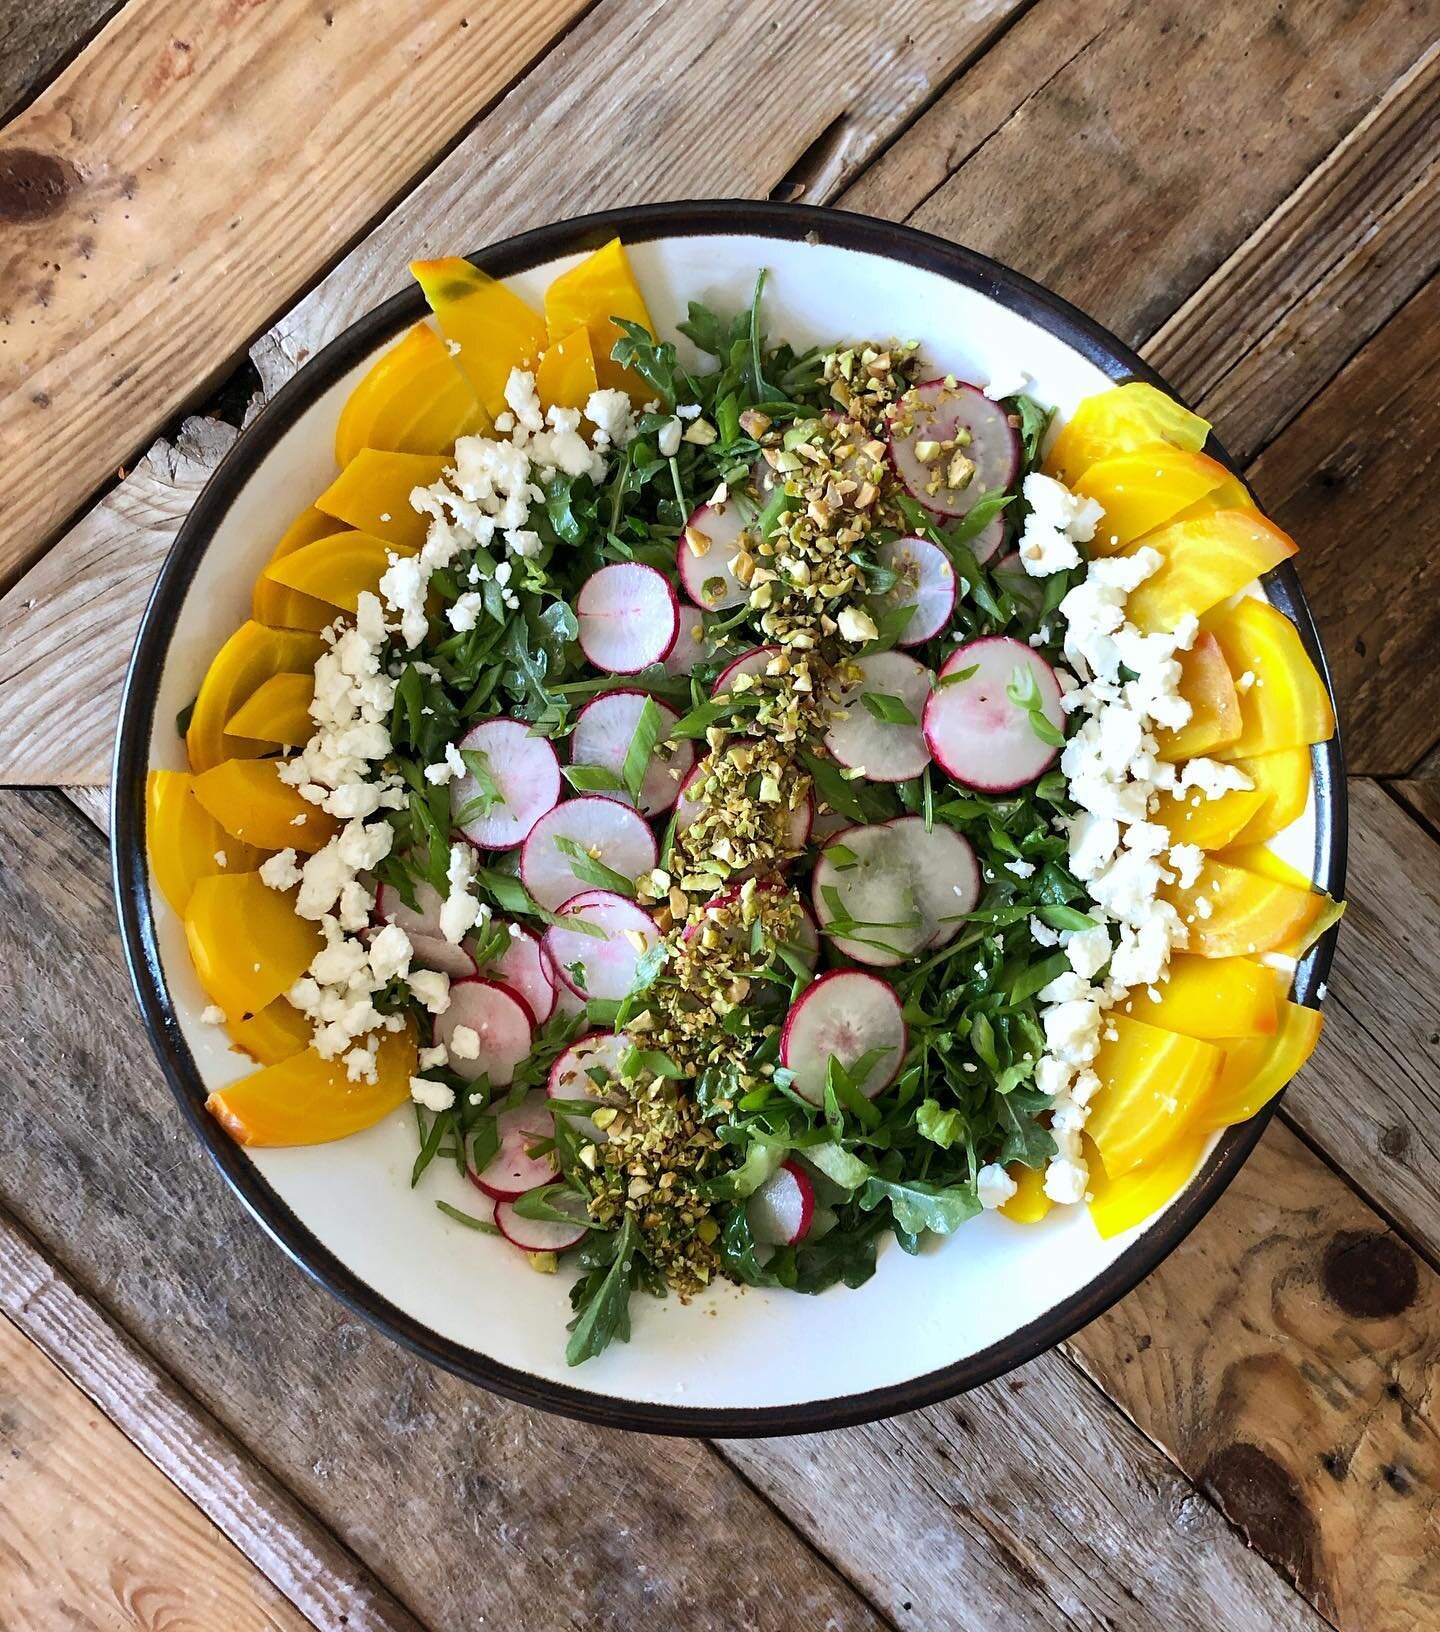 Well hello there, gorgeous (and hello there, Instagram, it&rsquo;s been a minute). Spring salad of arugula, radish, scallions, roasted golden beets, goat cheese &amp; pistachios for Easter lunch. 💖💚💛